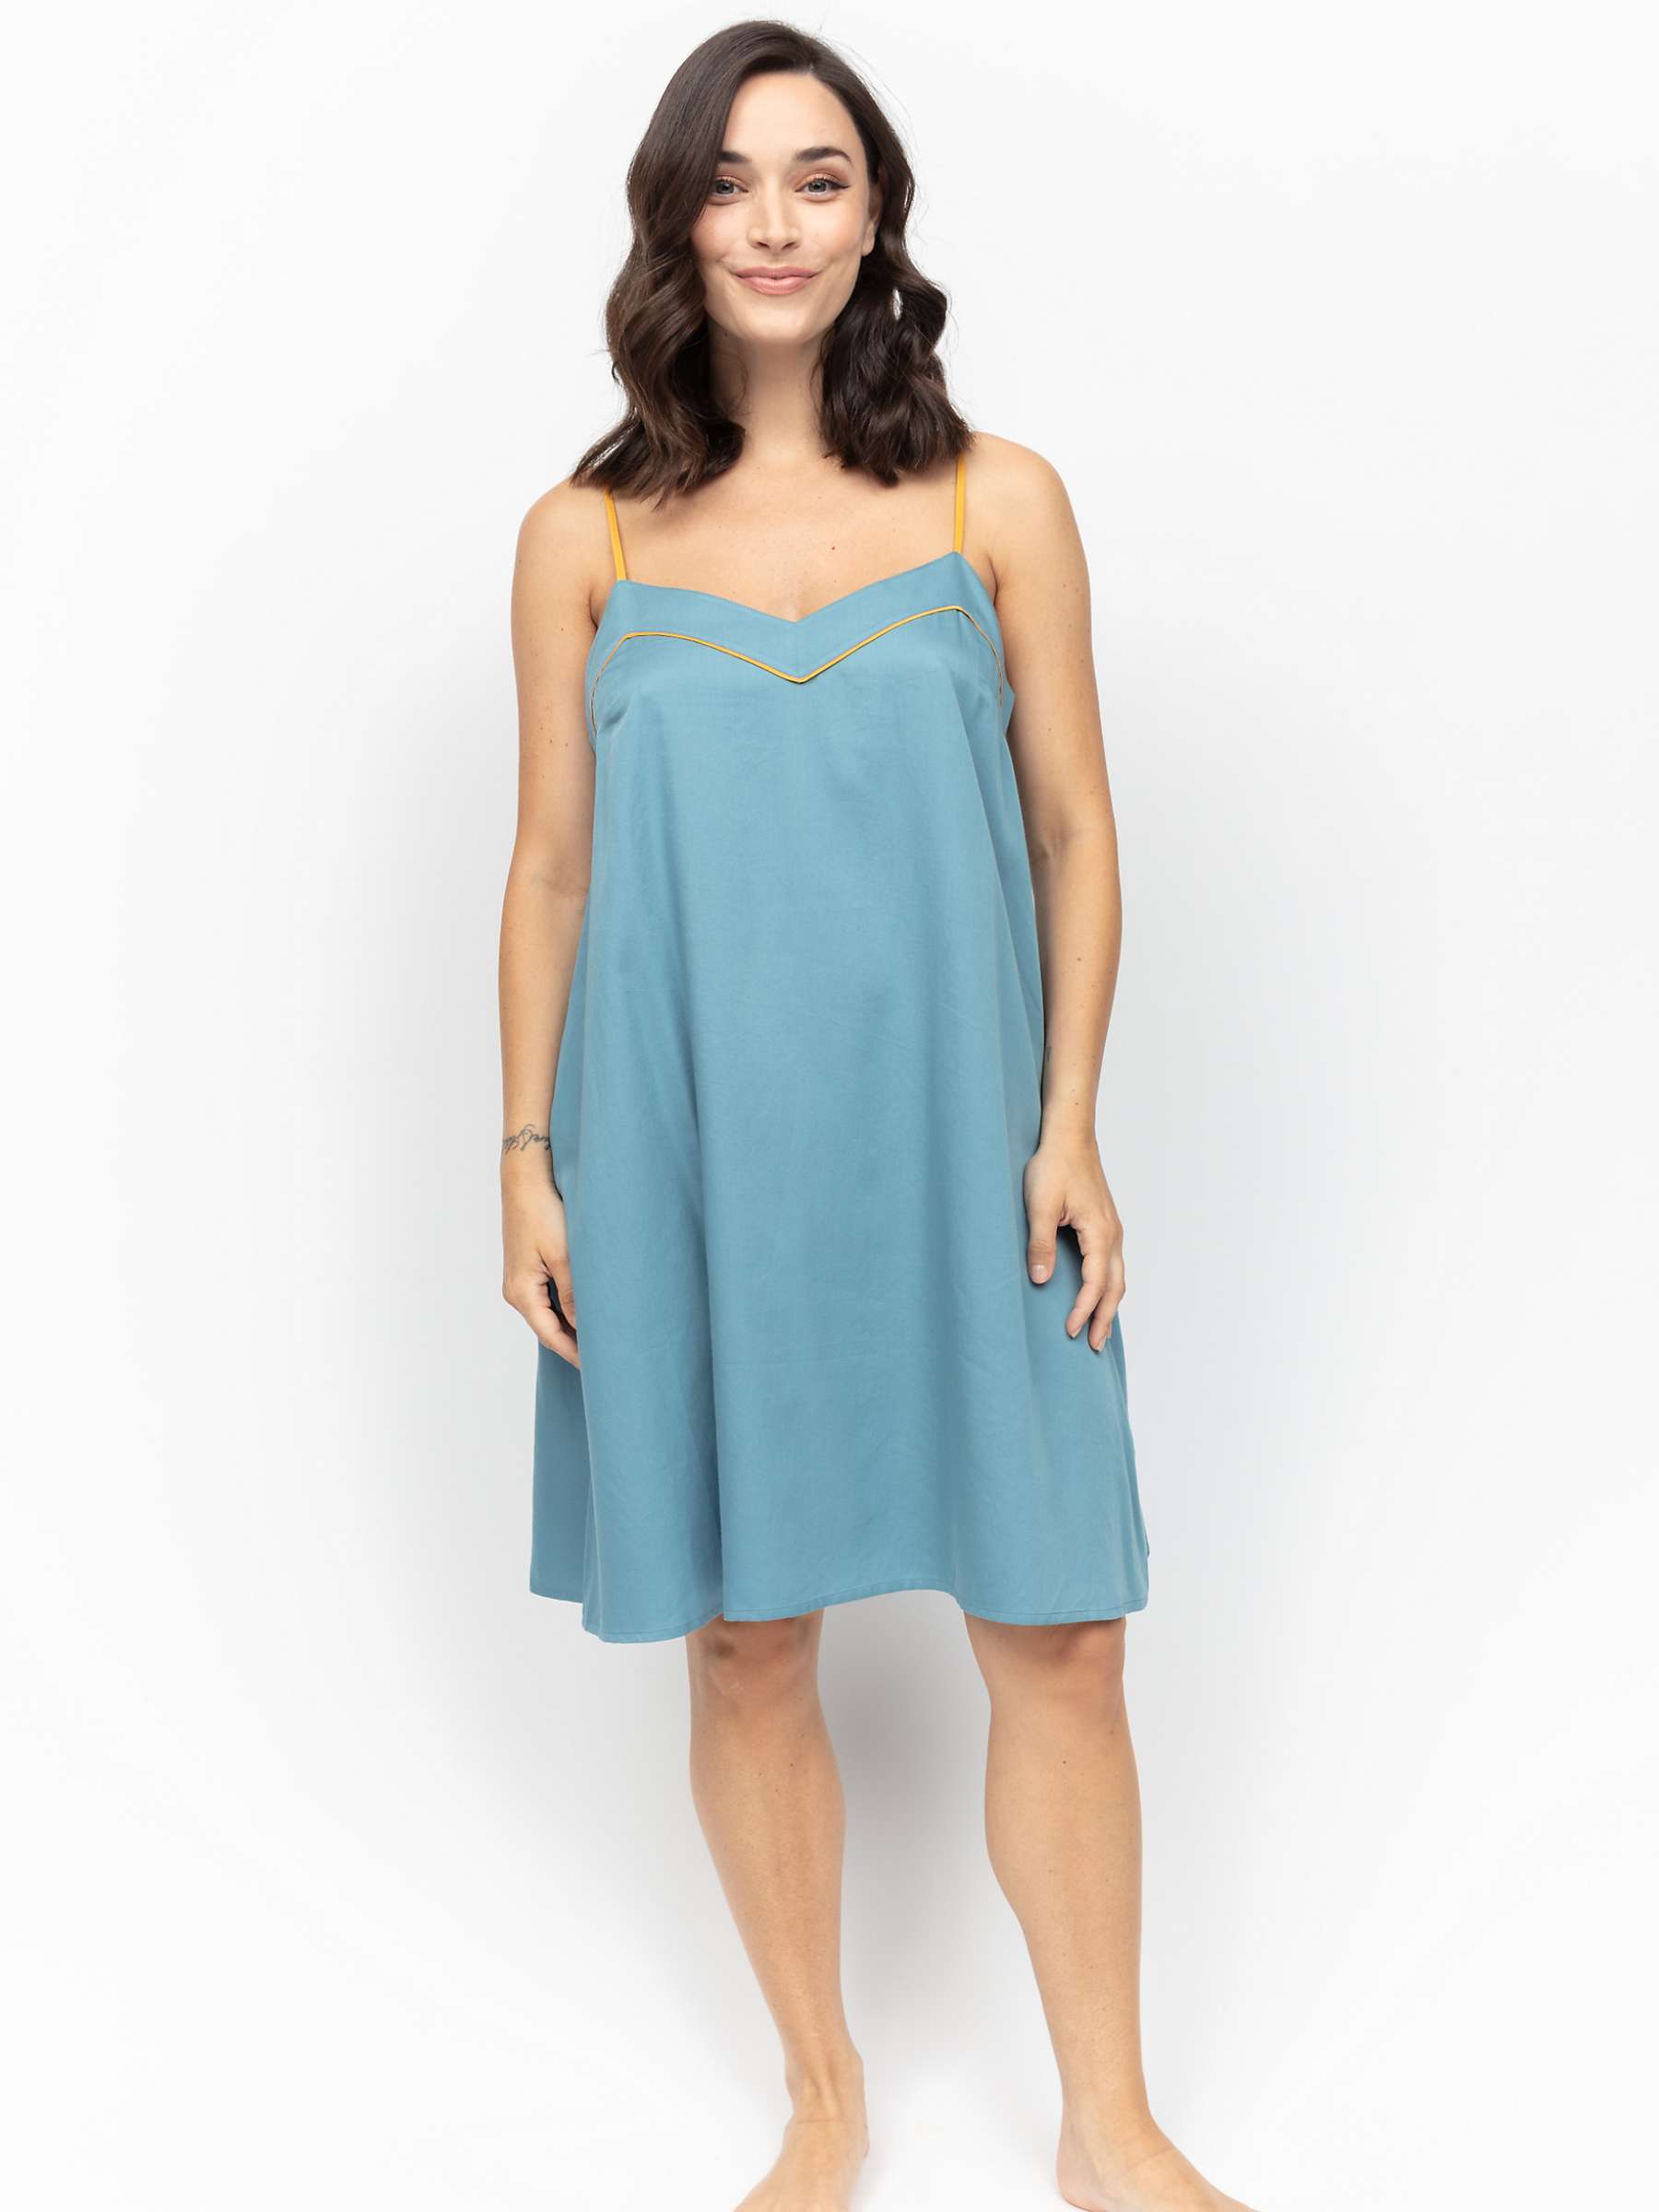 Buy Fable & Eve Greenwich Solid Nightdress, Cerulean Blue Online at johnlewis.com